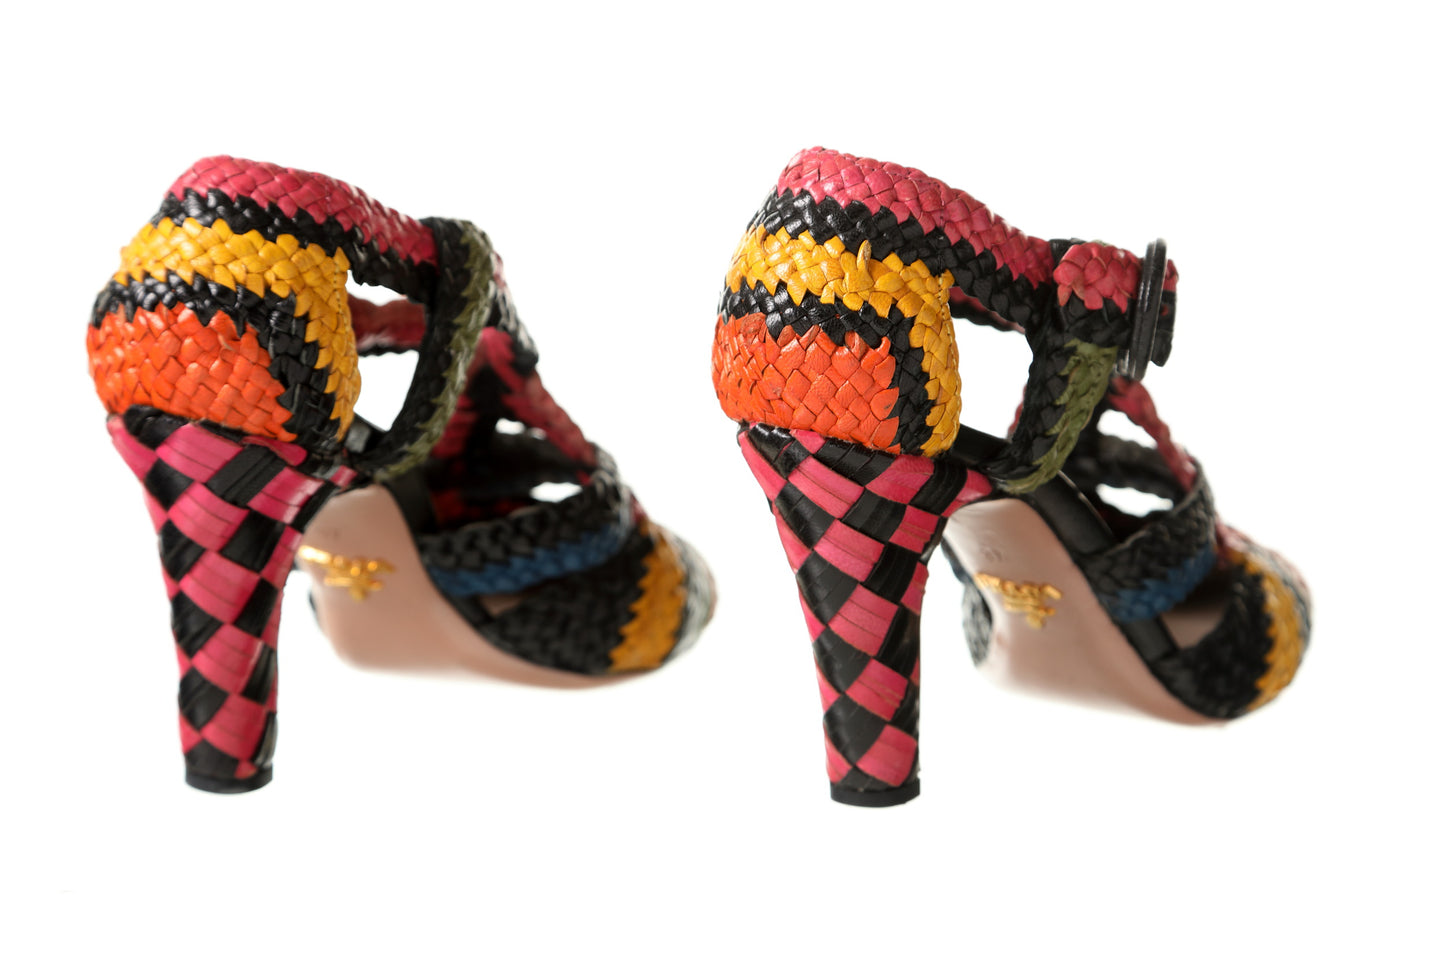 Prada Mary Jane pumps from the Spring 2011 runway collection